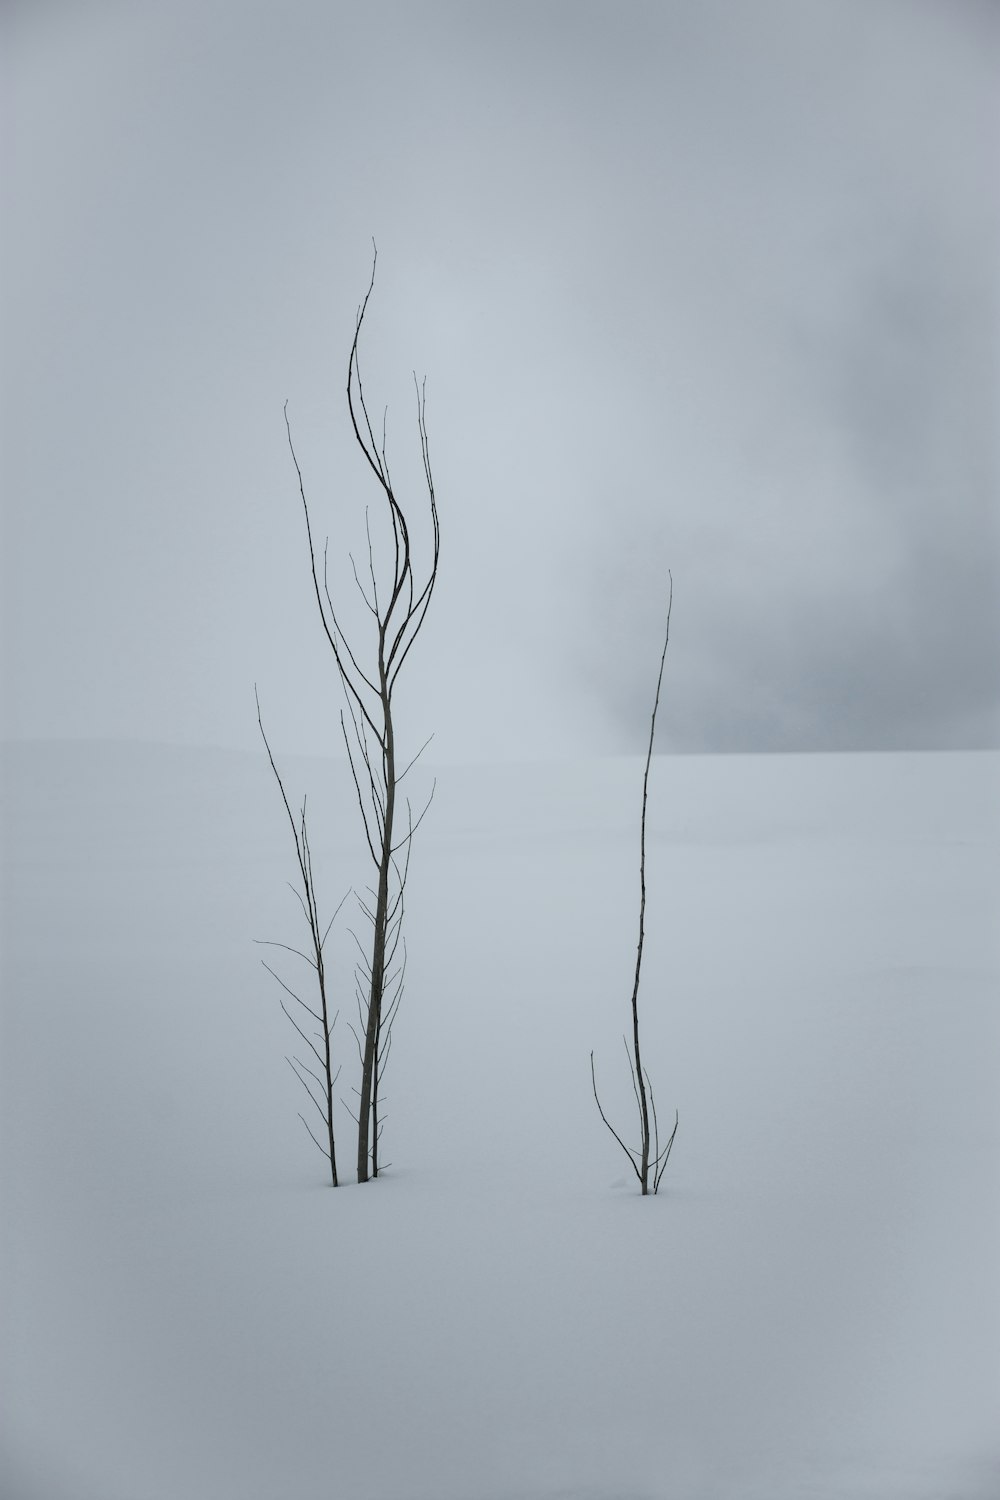 a couple of dead trees standing in the snow